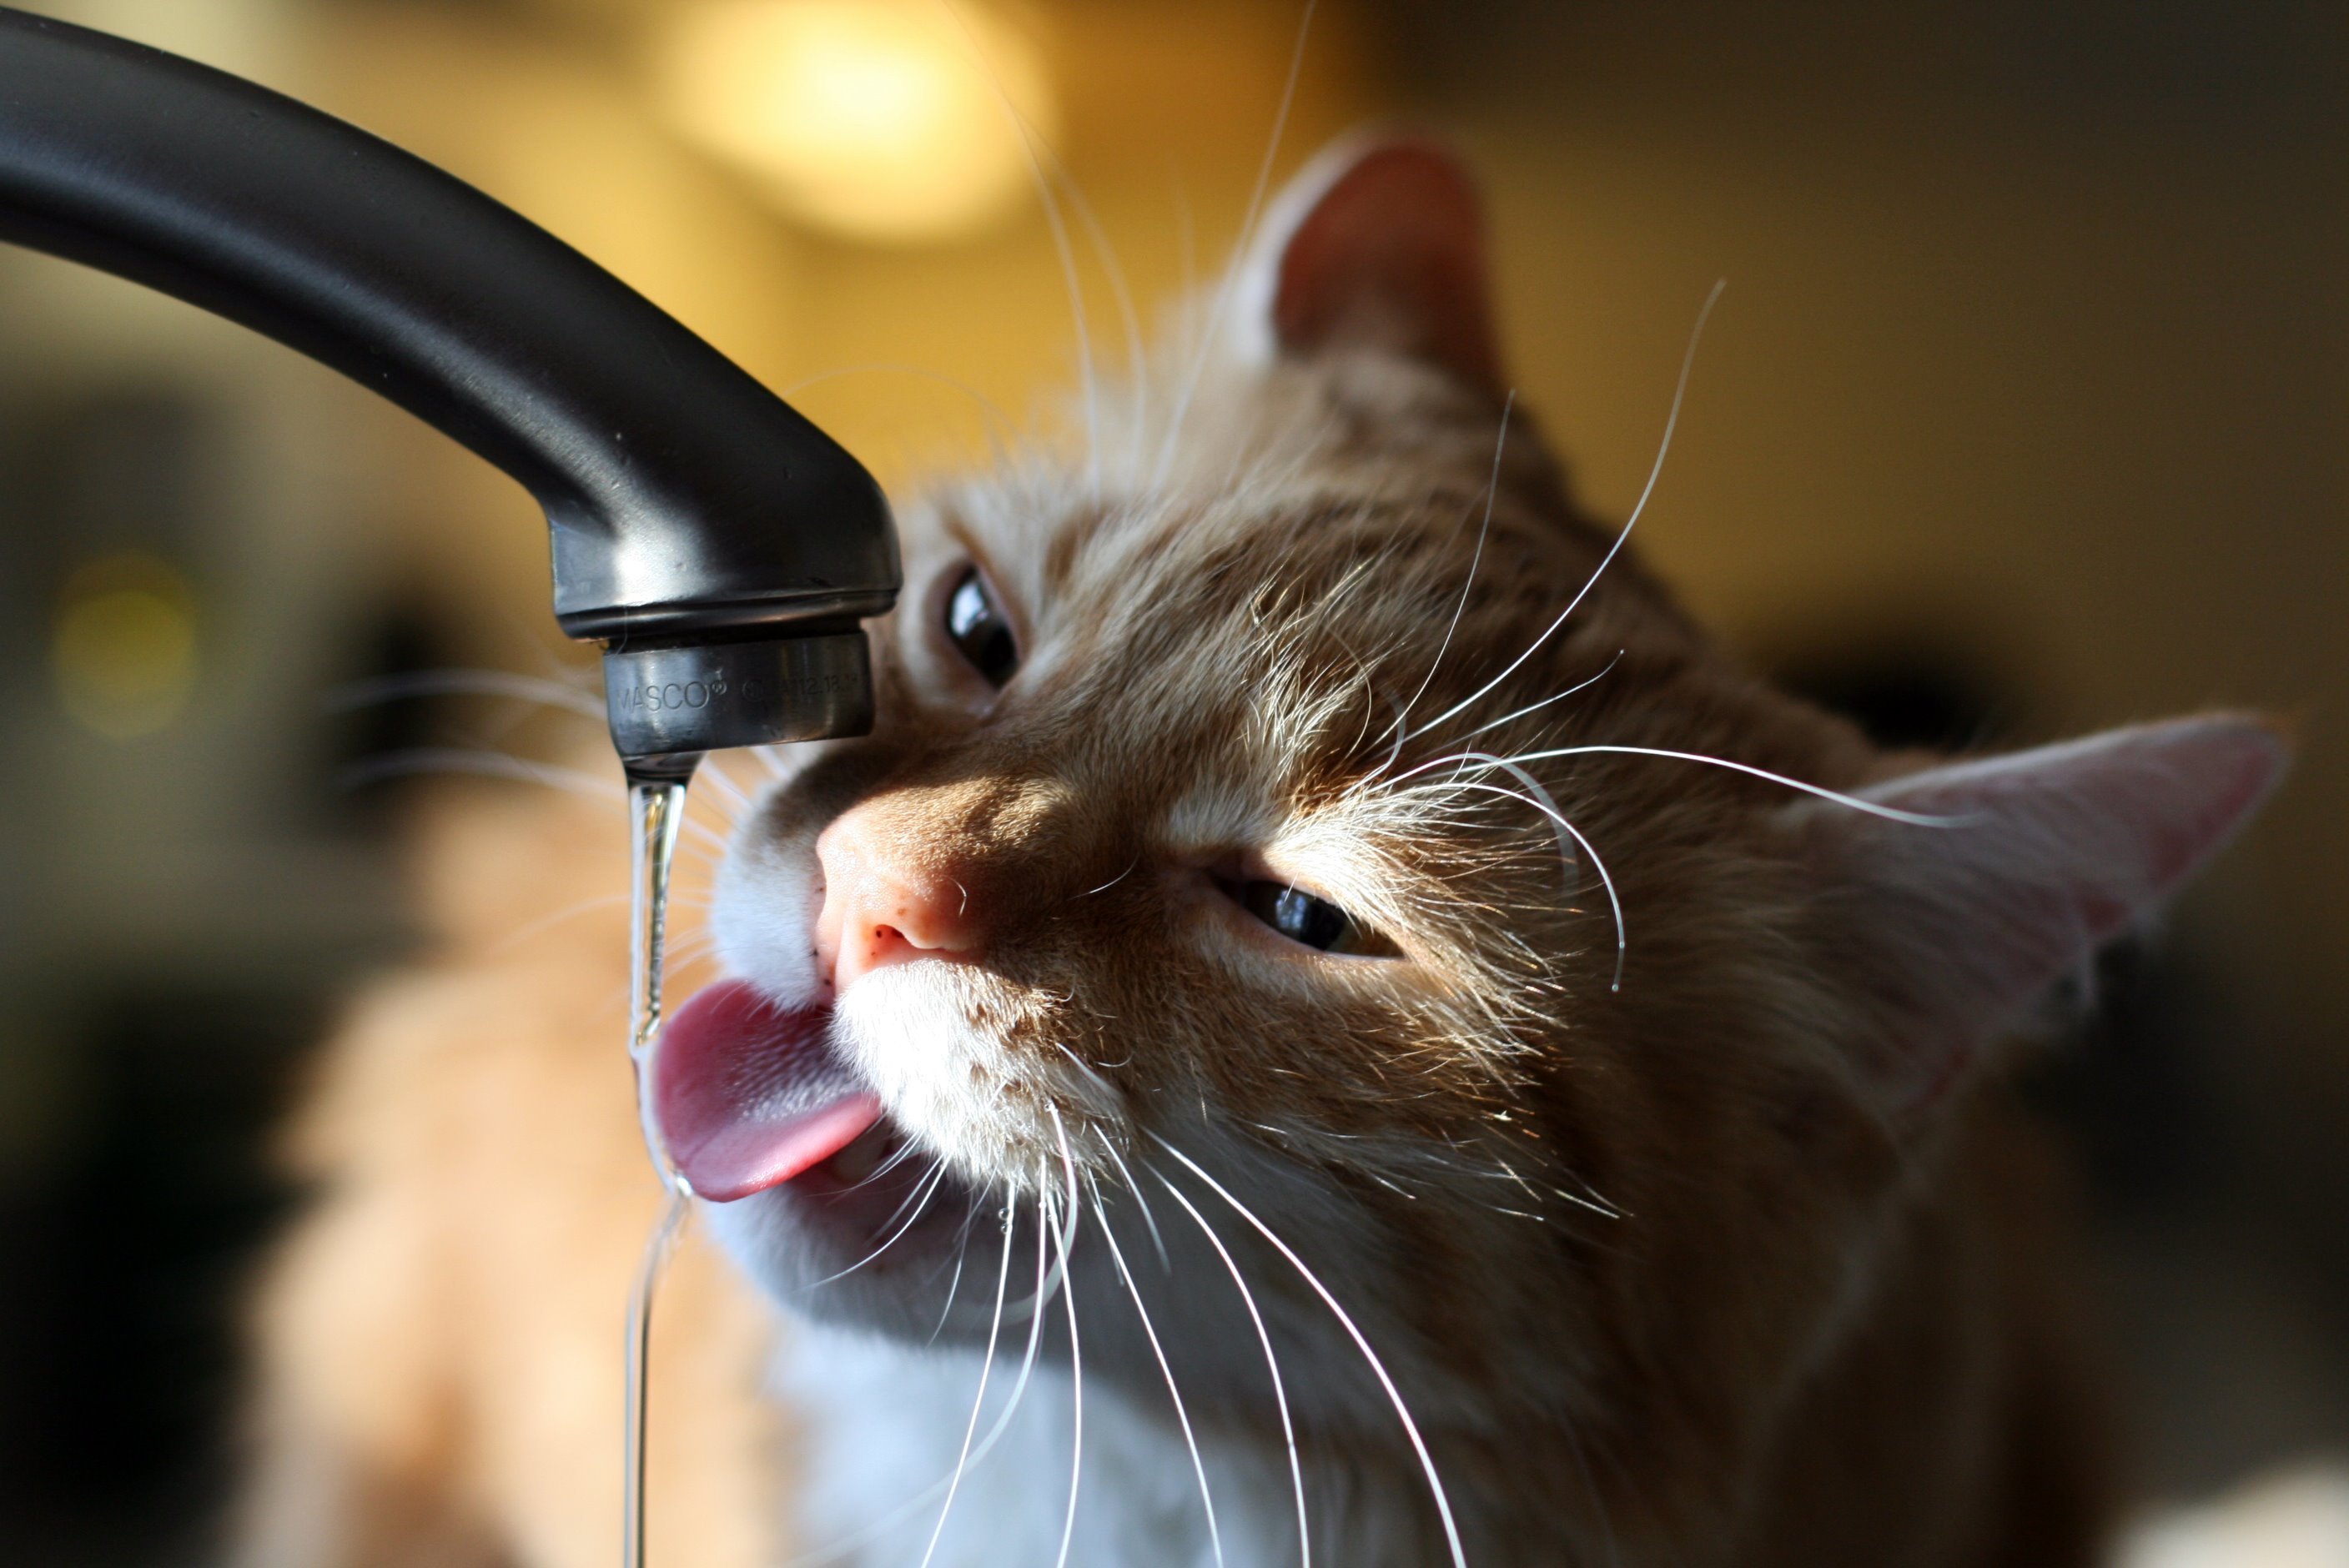 How to help your dehydrated cat?